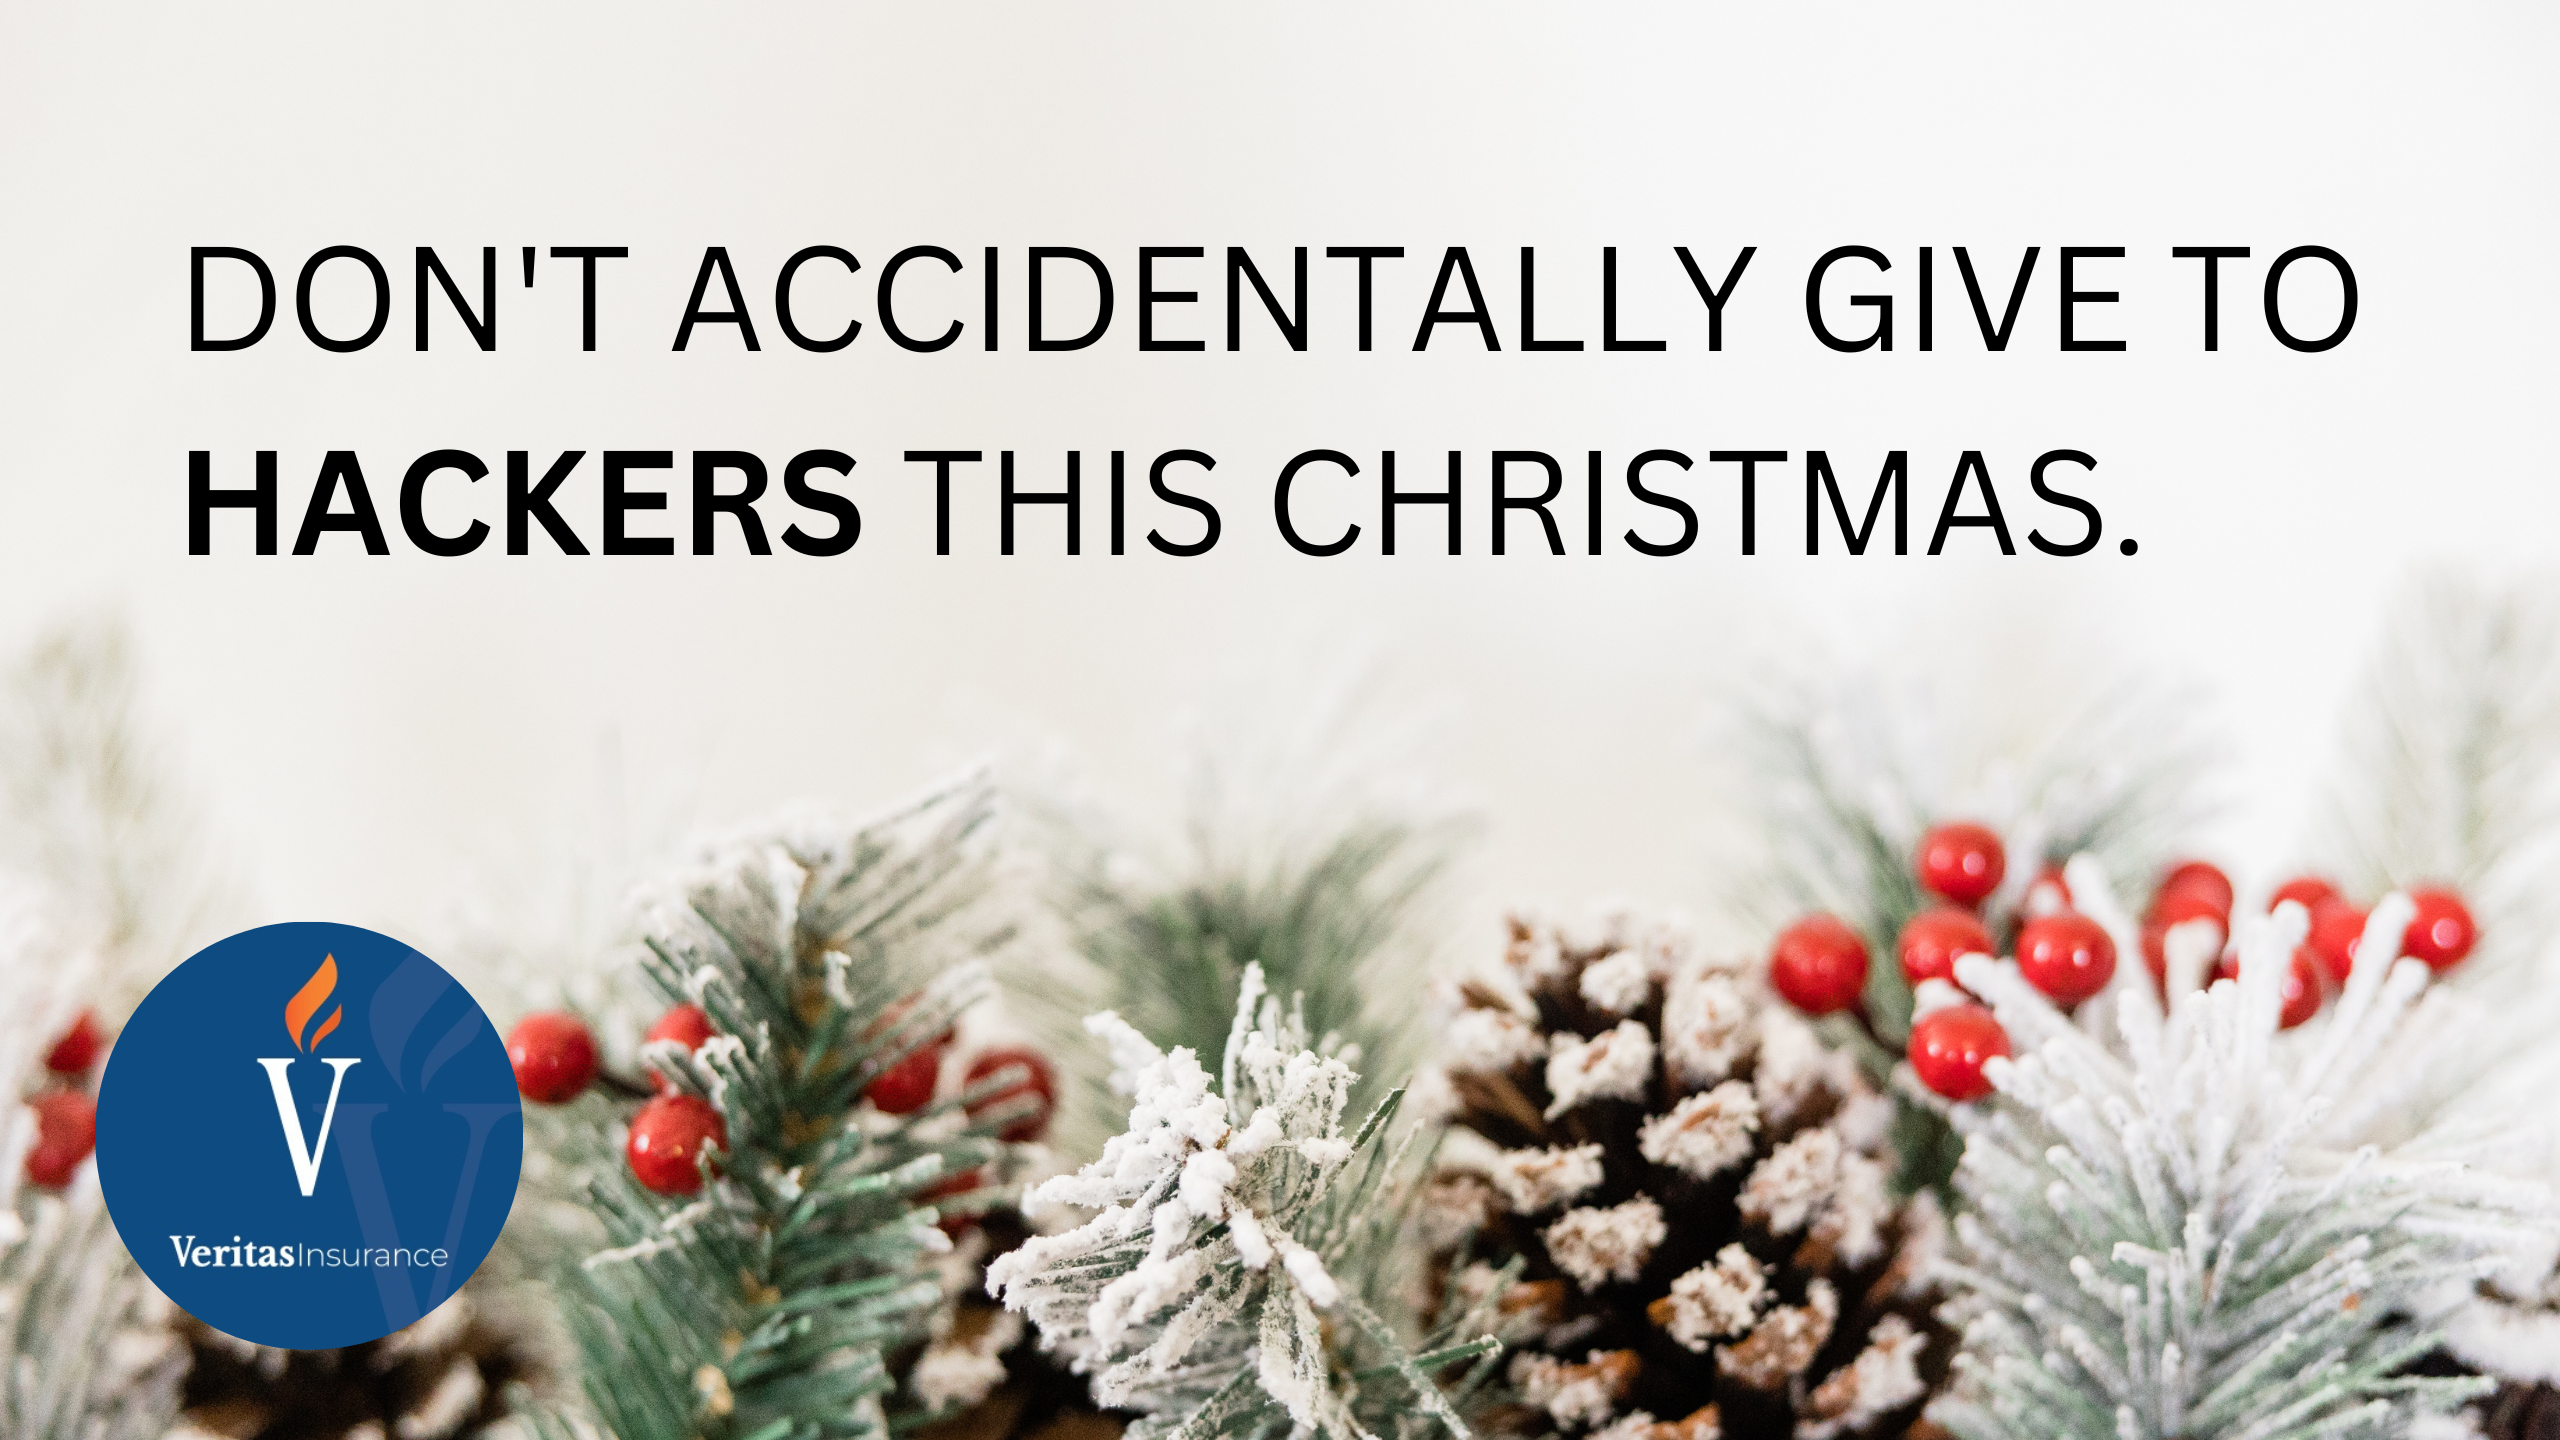 Don't accidentally give to hackers this holiday.